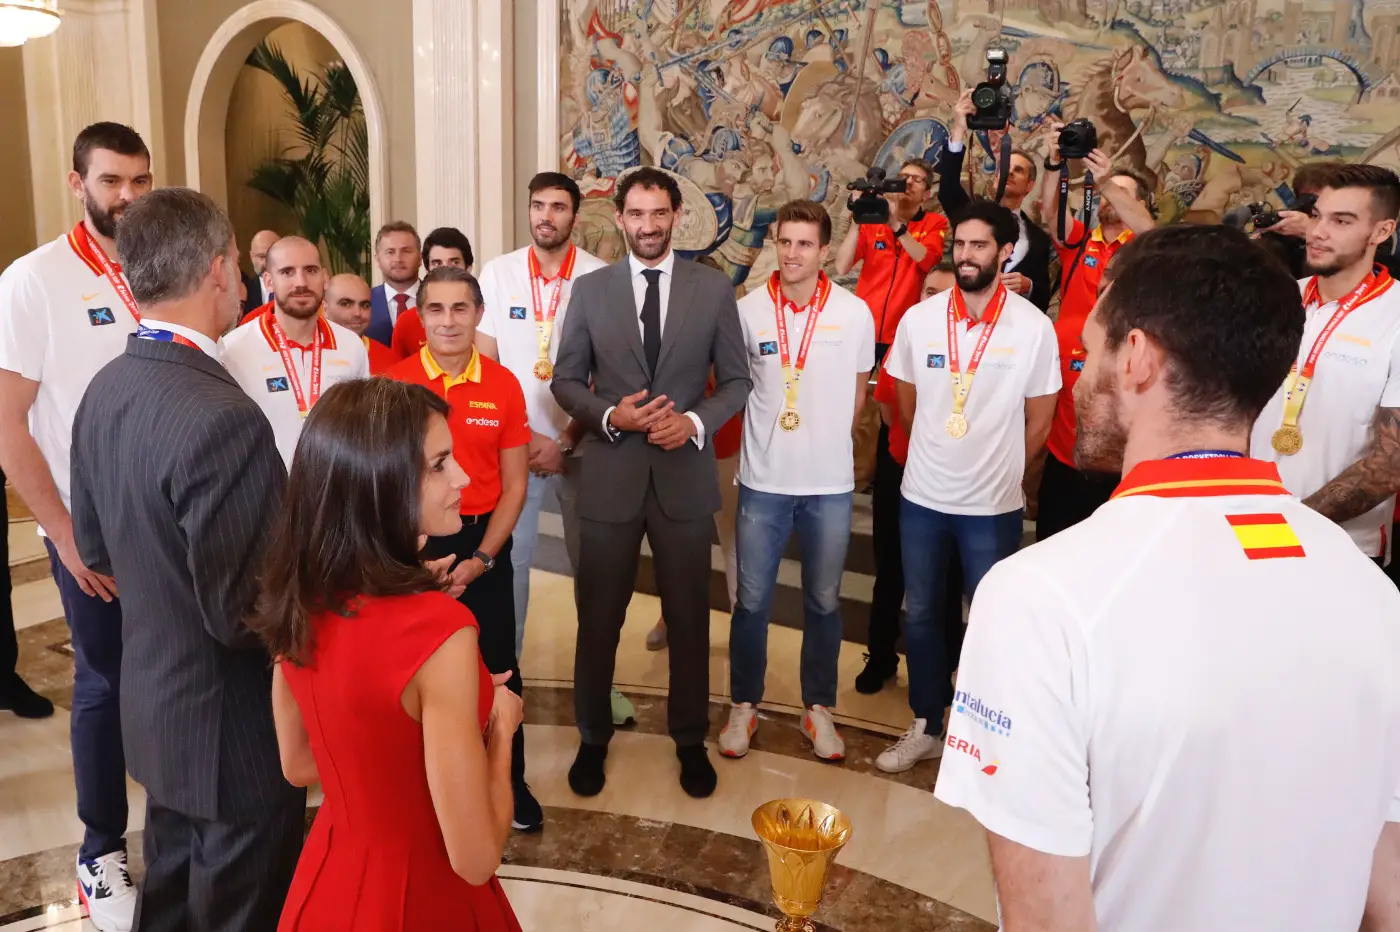 Queen Letizia in red sleeveless dress to receive basketball team at palace